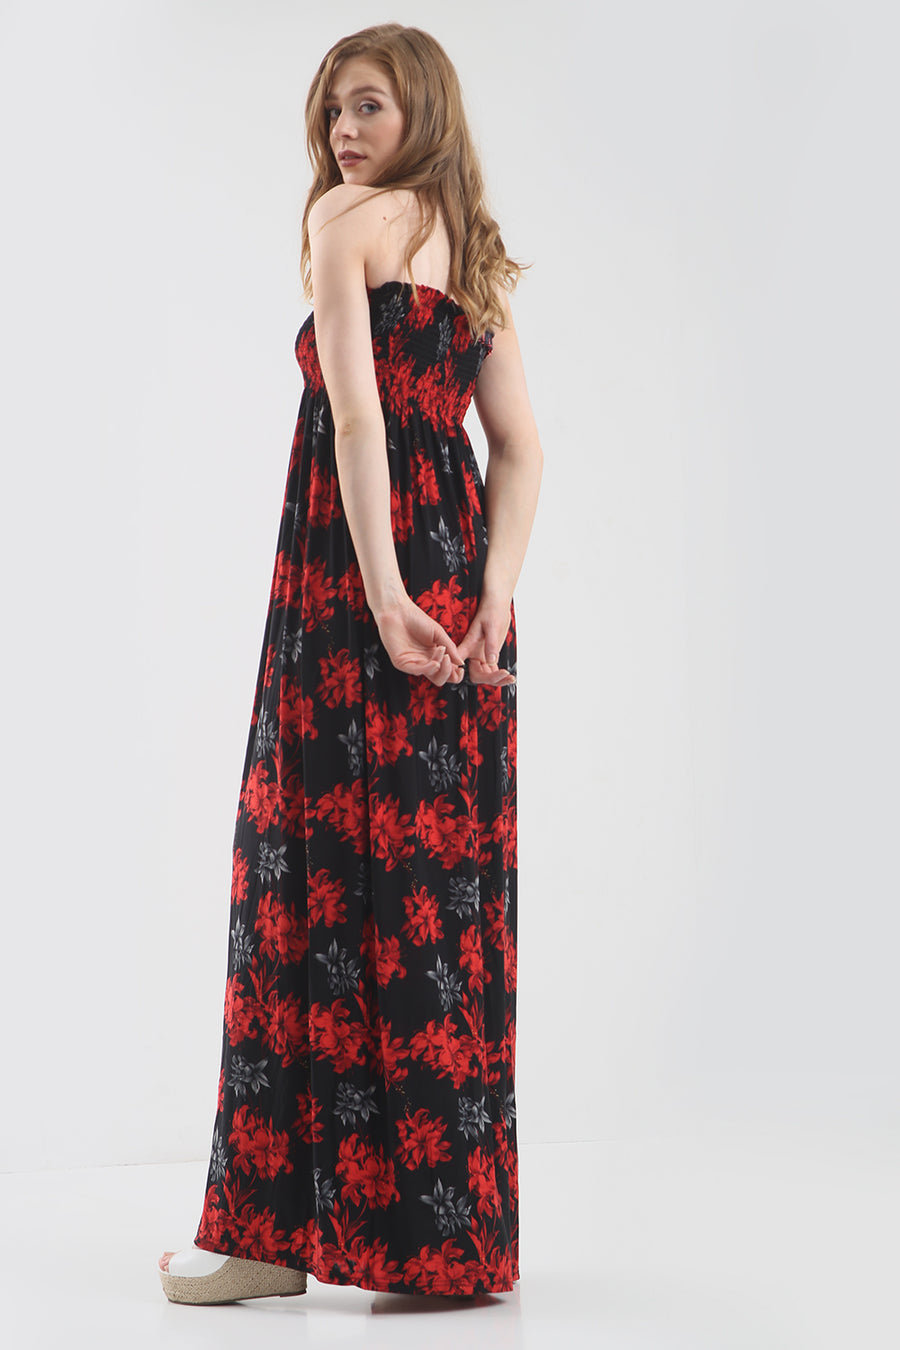 Strapless Maxi Dress in Red Tropical Print - bejealous-com